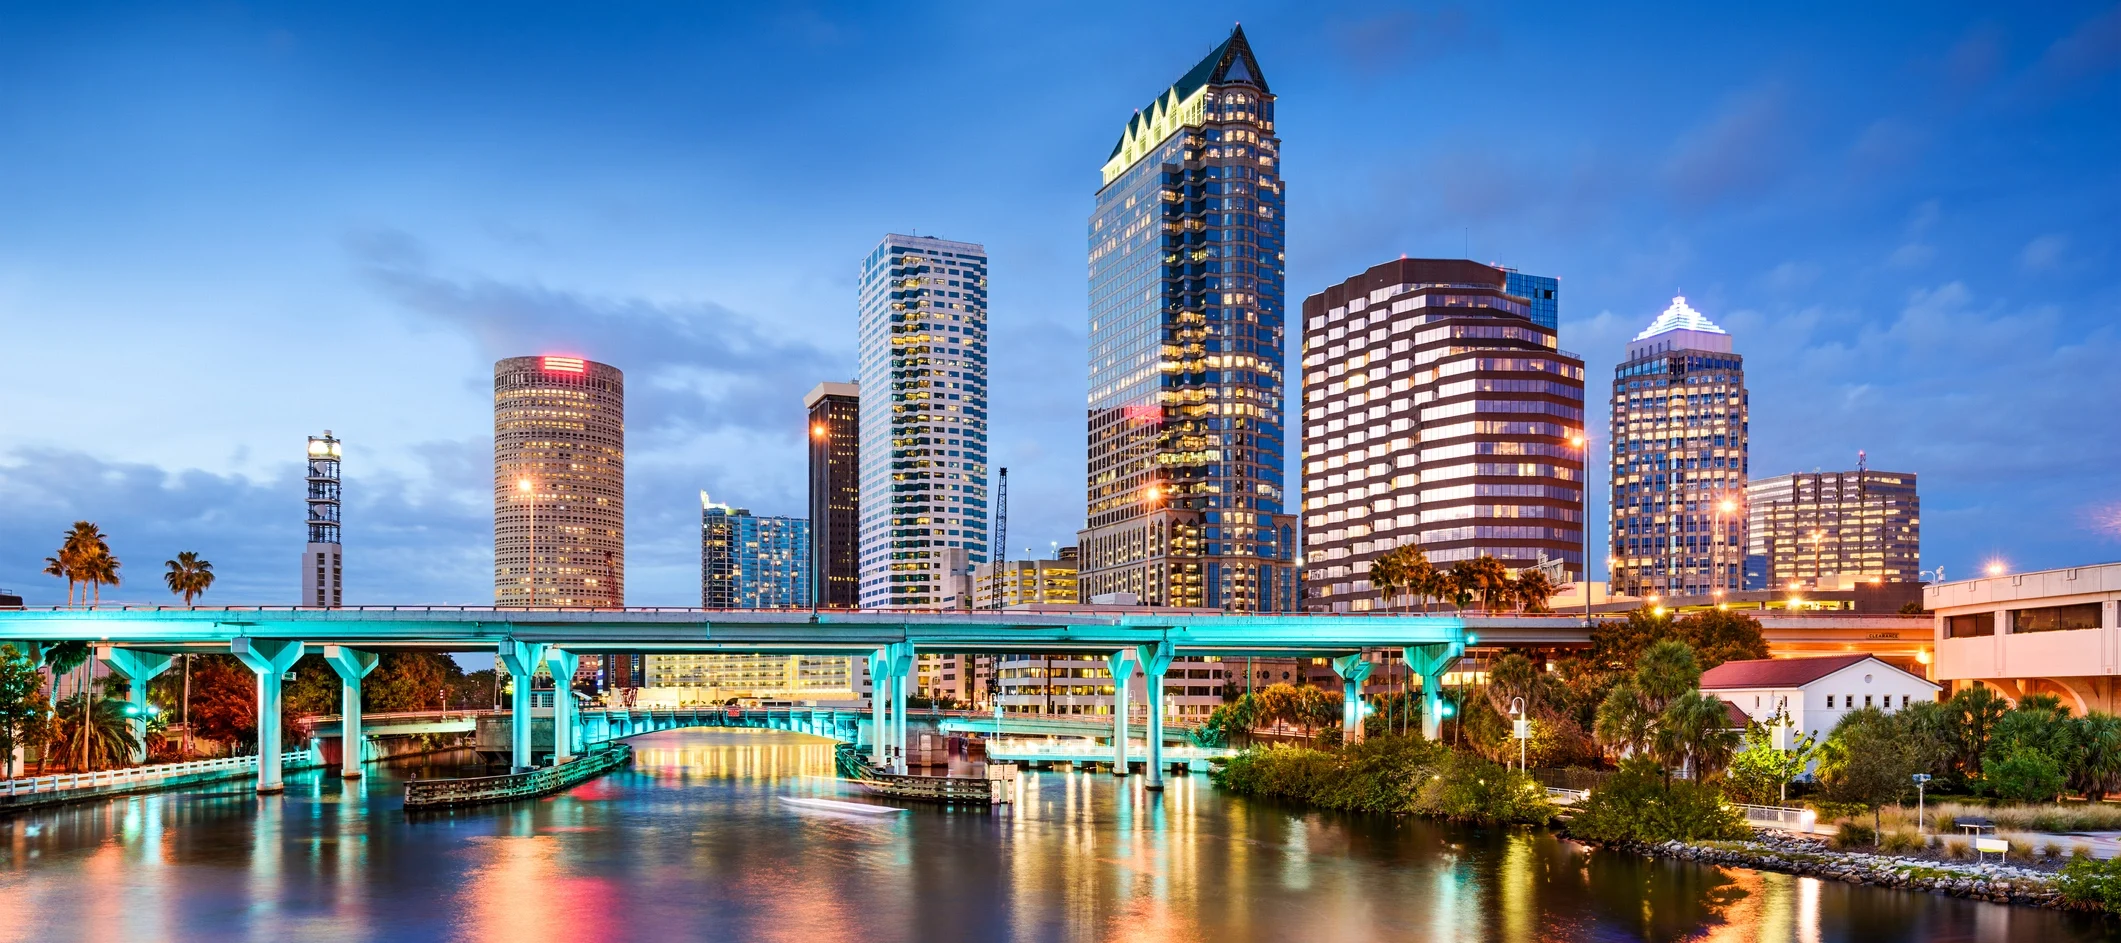 Tampa Real Estate Investment - Tampa skyline